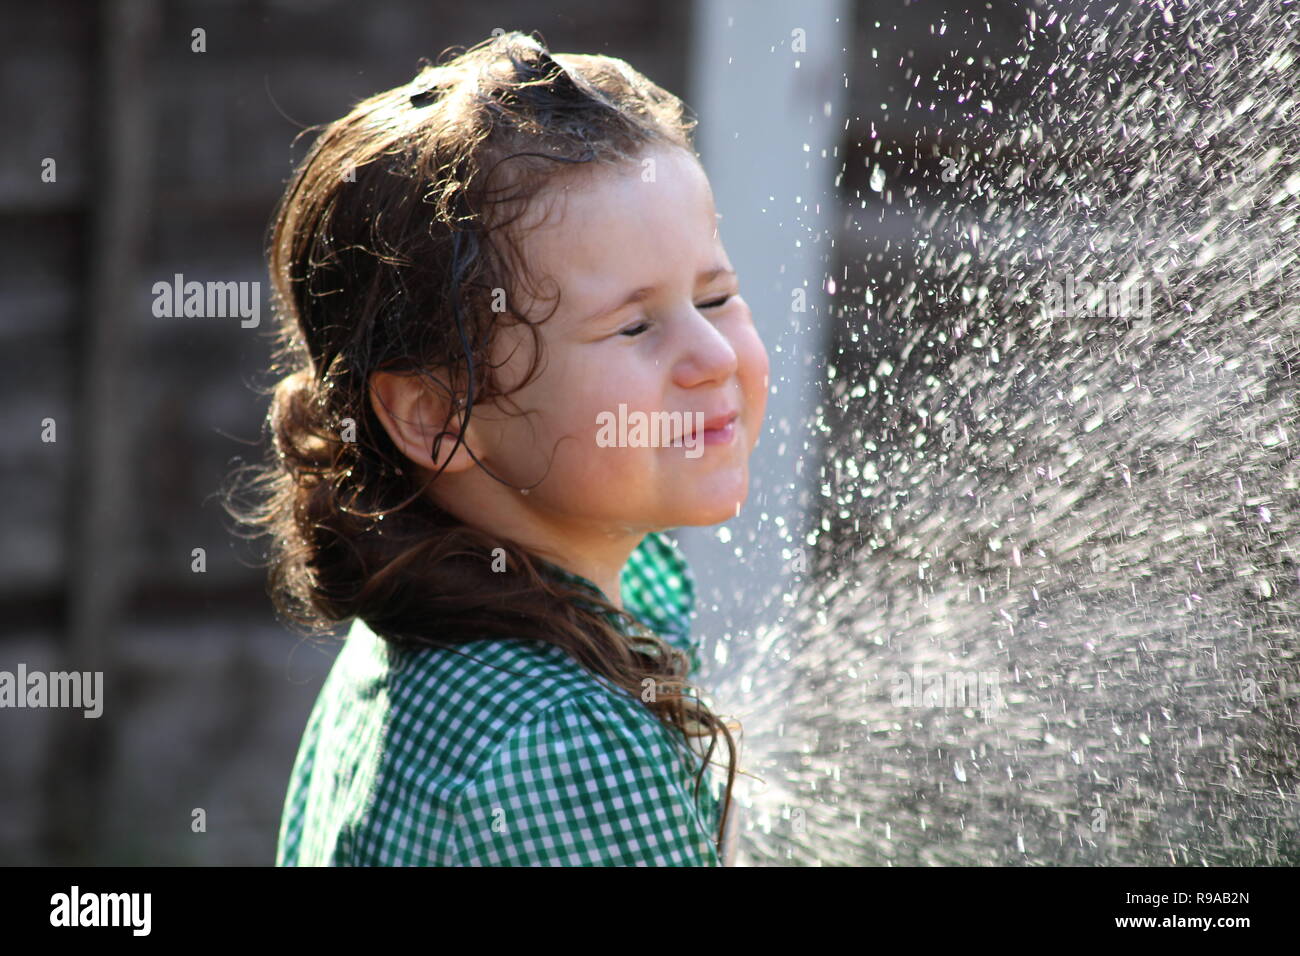 young child girl playing with a hose pipe and spraying water in her face Stock Photo